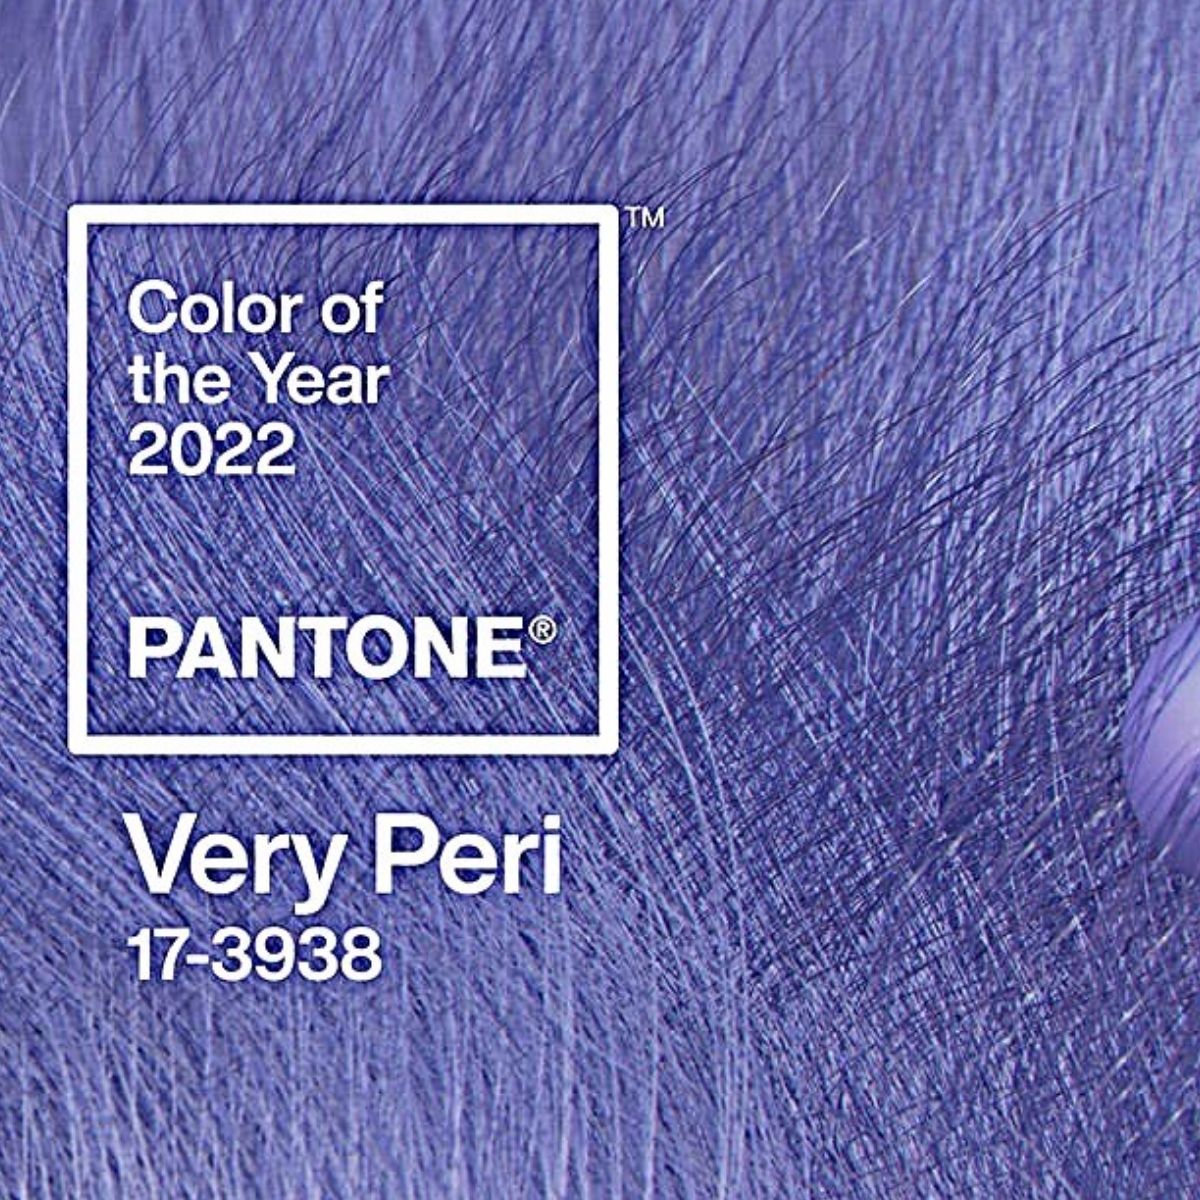 announcing-the-pantone-color-of-the-year-2022-very-peri-featured